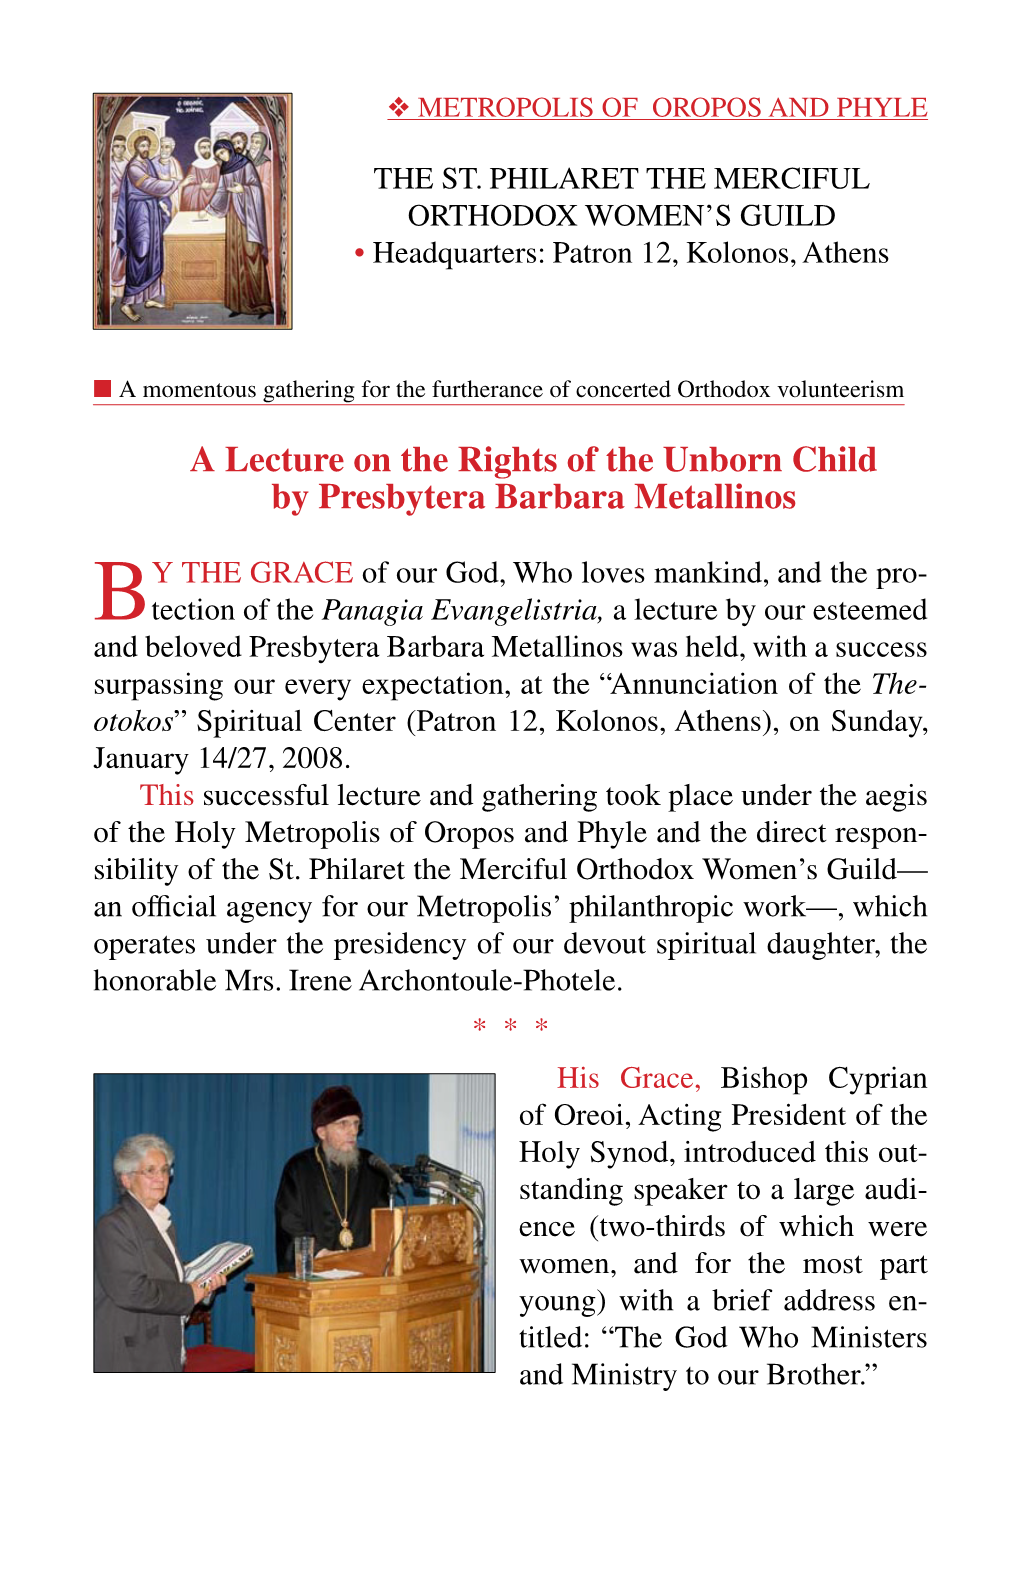 A Lecture on the Rights of the Unborn Child by Presbytera Barbara Metallinos